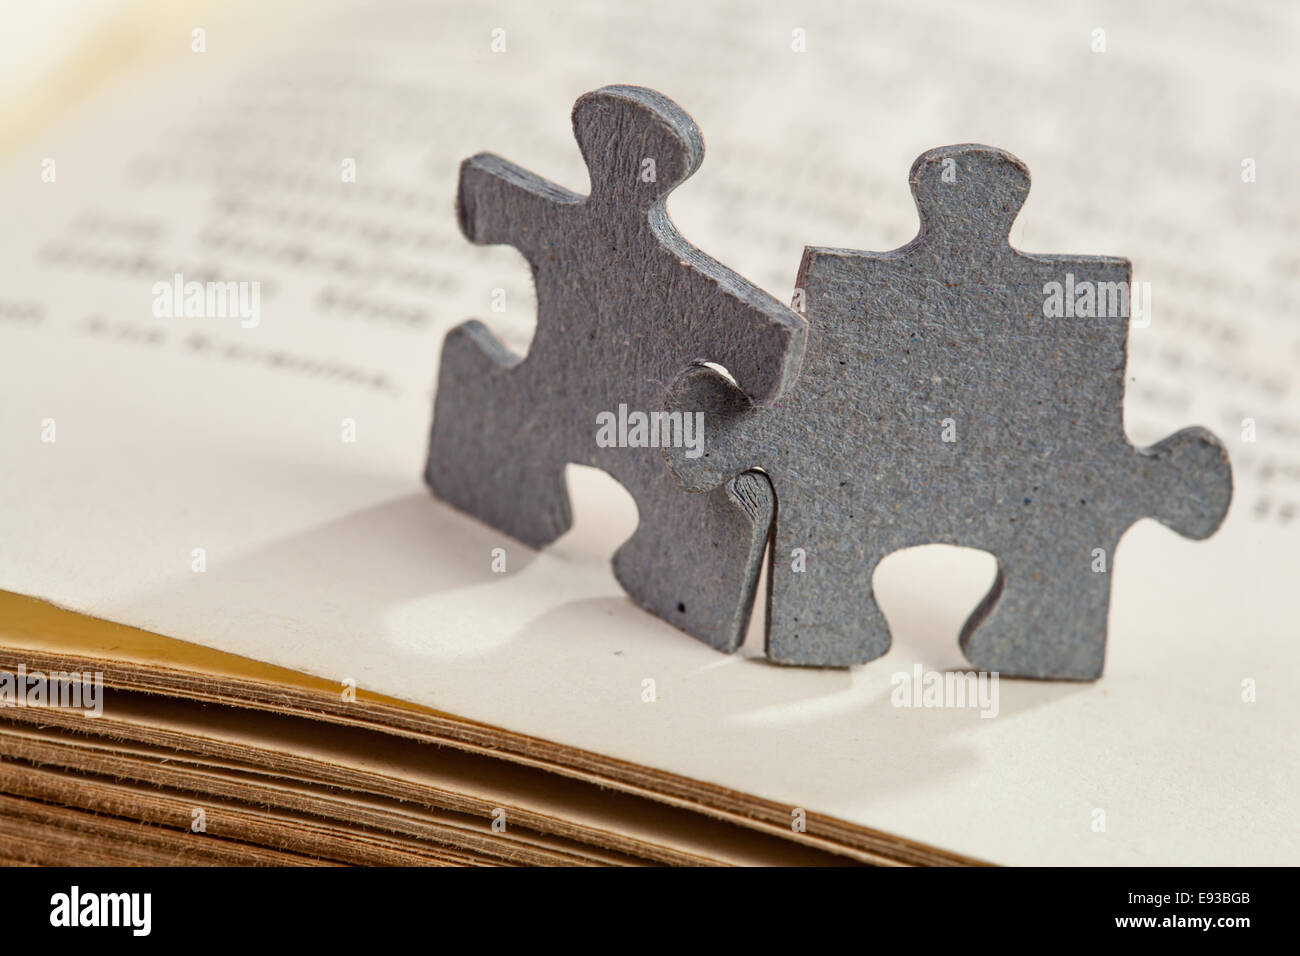 Concept of friendship and learning: closeup of two jigsaw puzzle pieces on book. Shallow depth of field Stock Photo